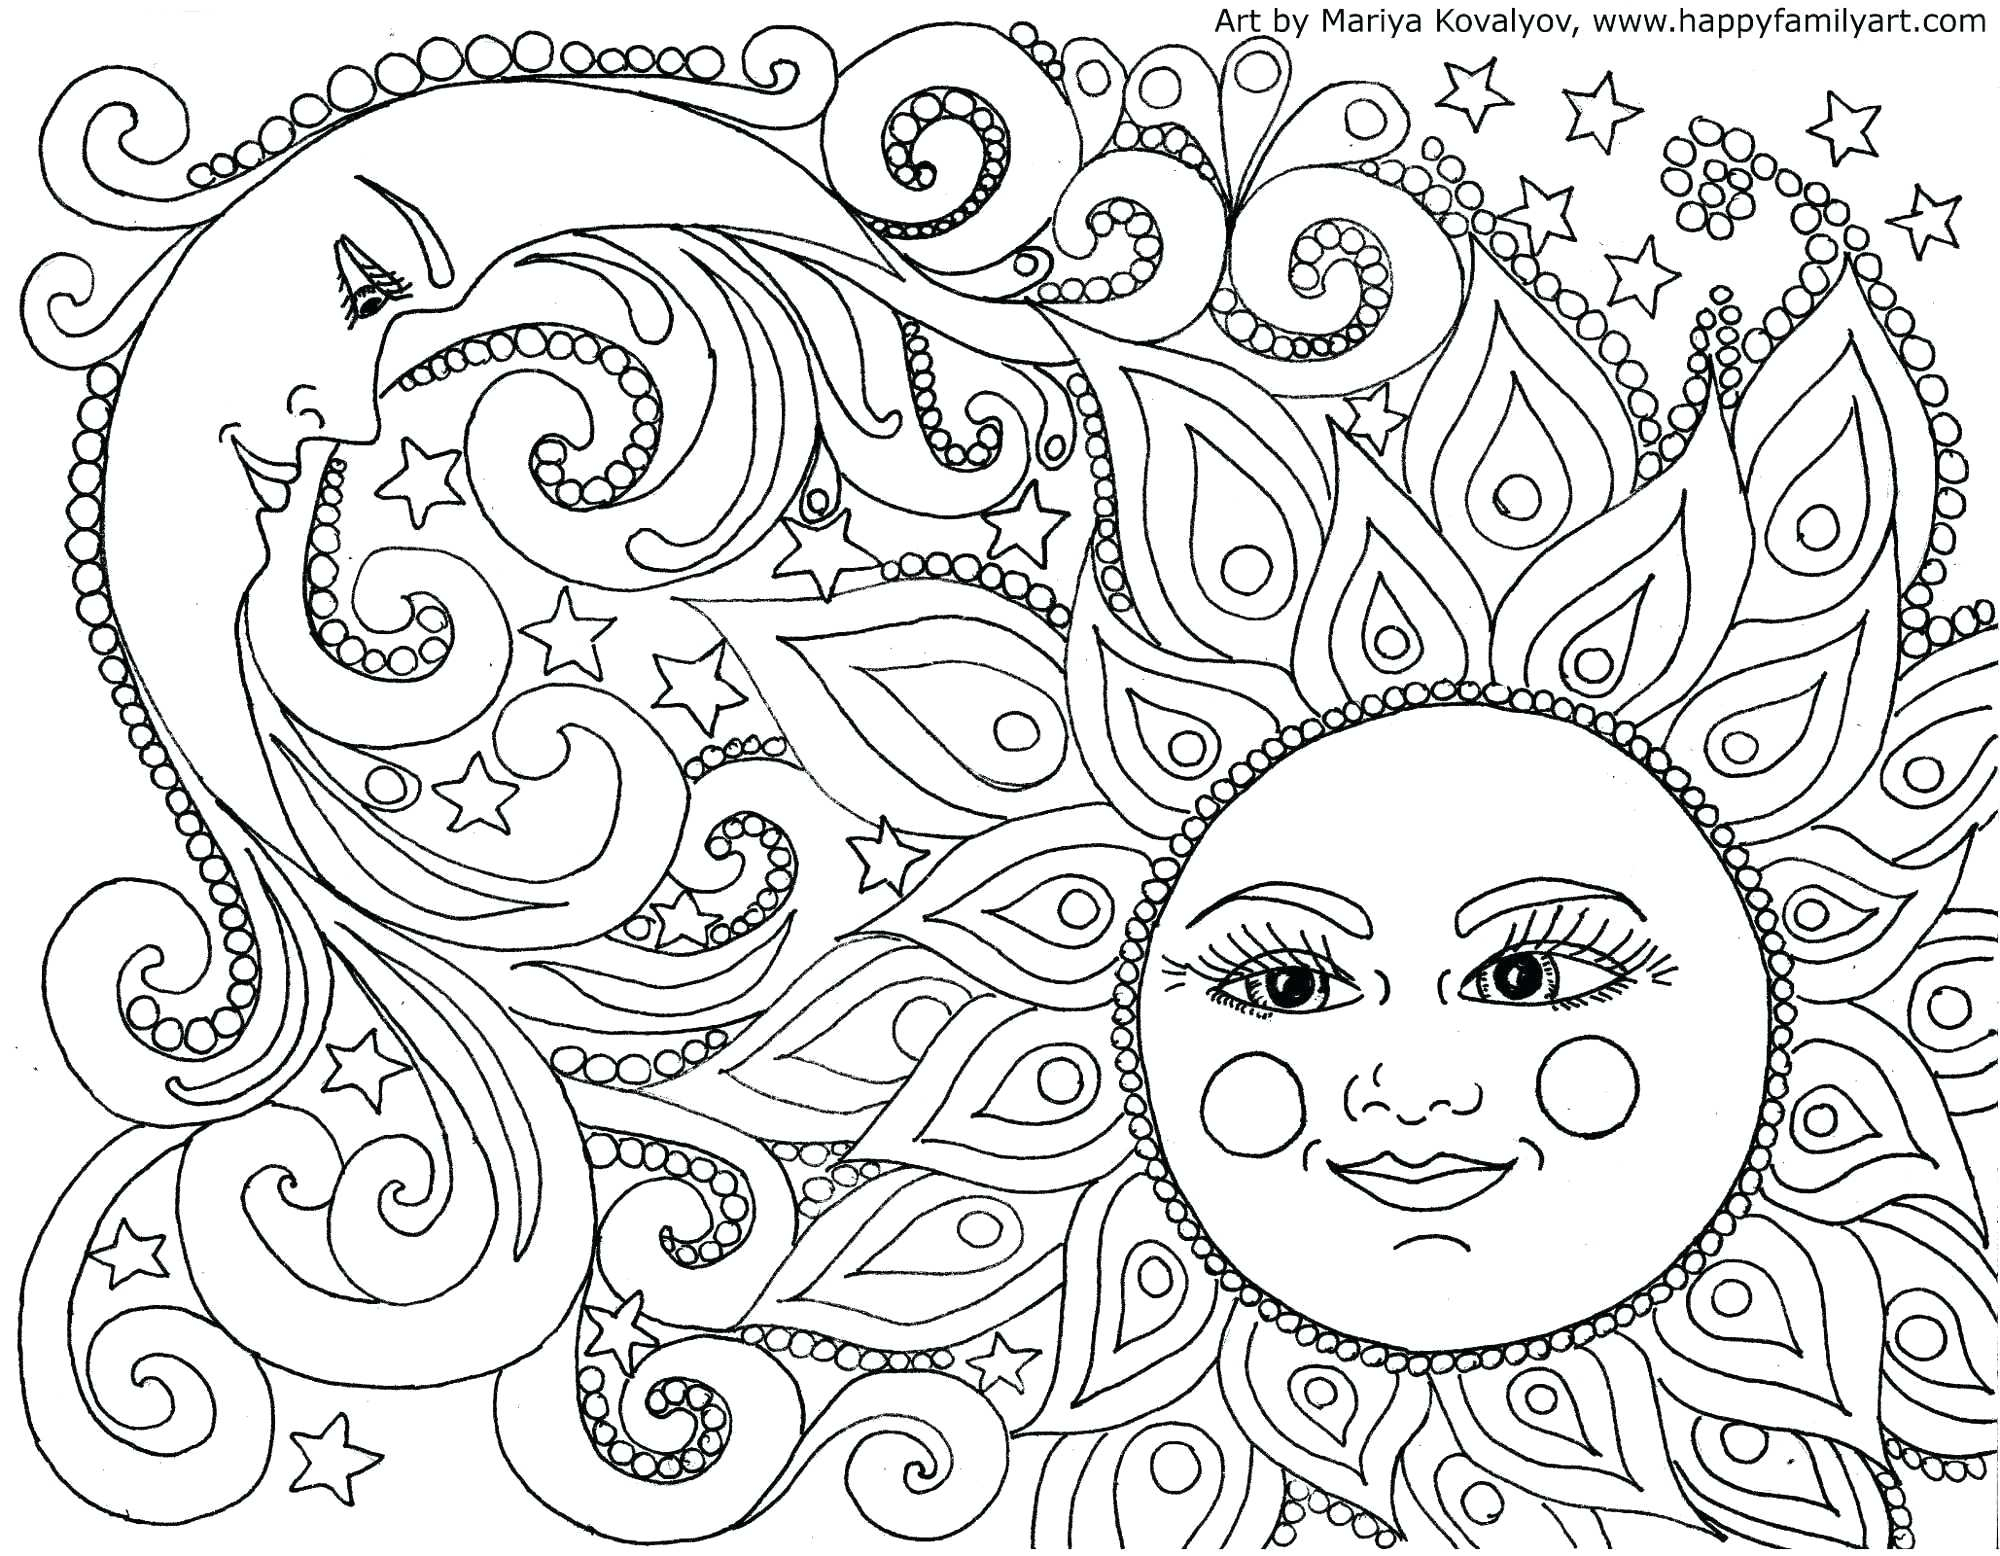 Summer Safety Coloring Pages Coloring Picture Of Sunglasses Bluedotsheetco